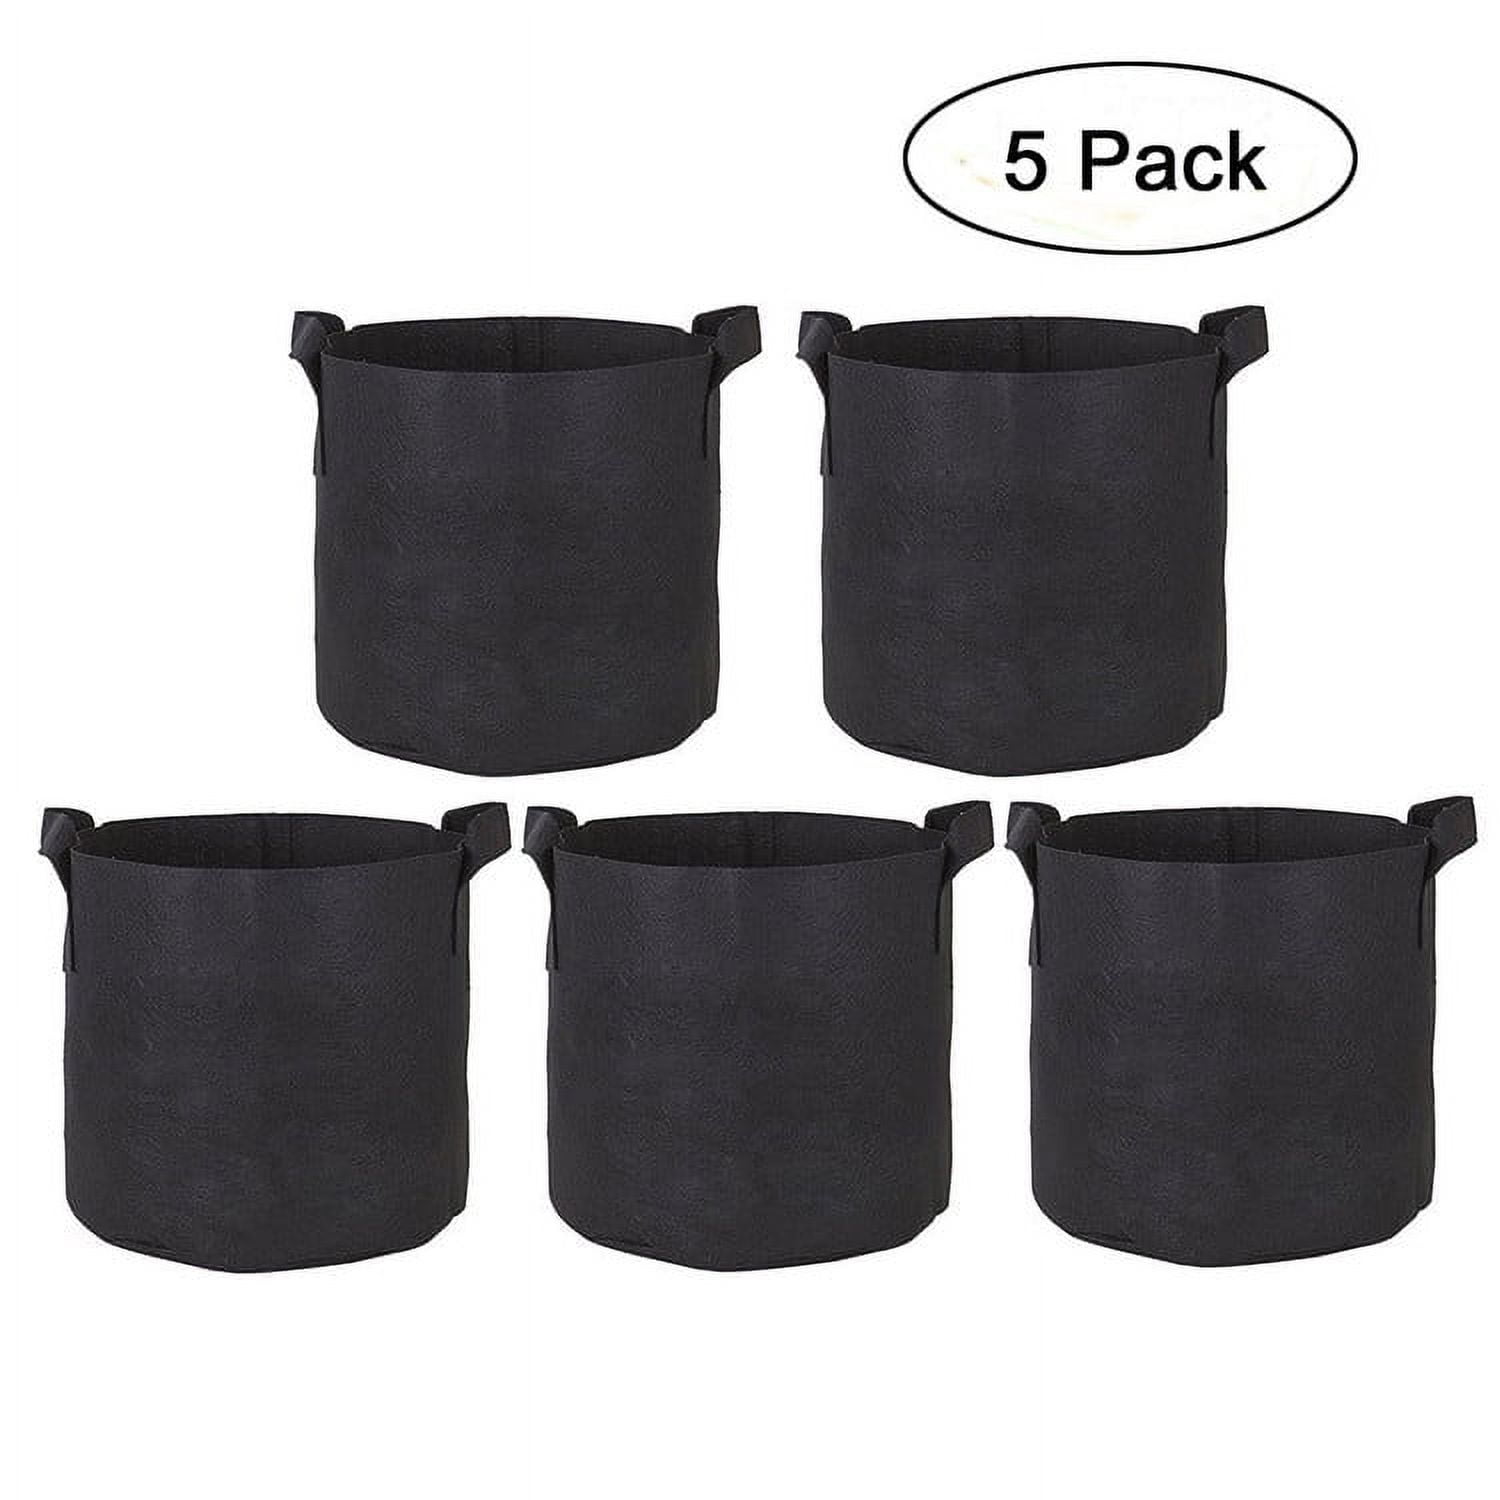 Kryc-6-pack 5 Gallon Plant Grow Bags, Premium Aeration Nonwoven Cloth  Fabric Grow Bags With Sturdy Handle And Shrink String, Flowers/vegetable  Pots Co